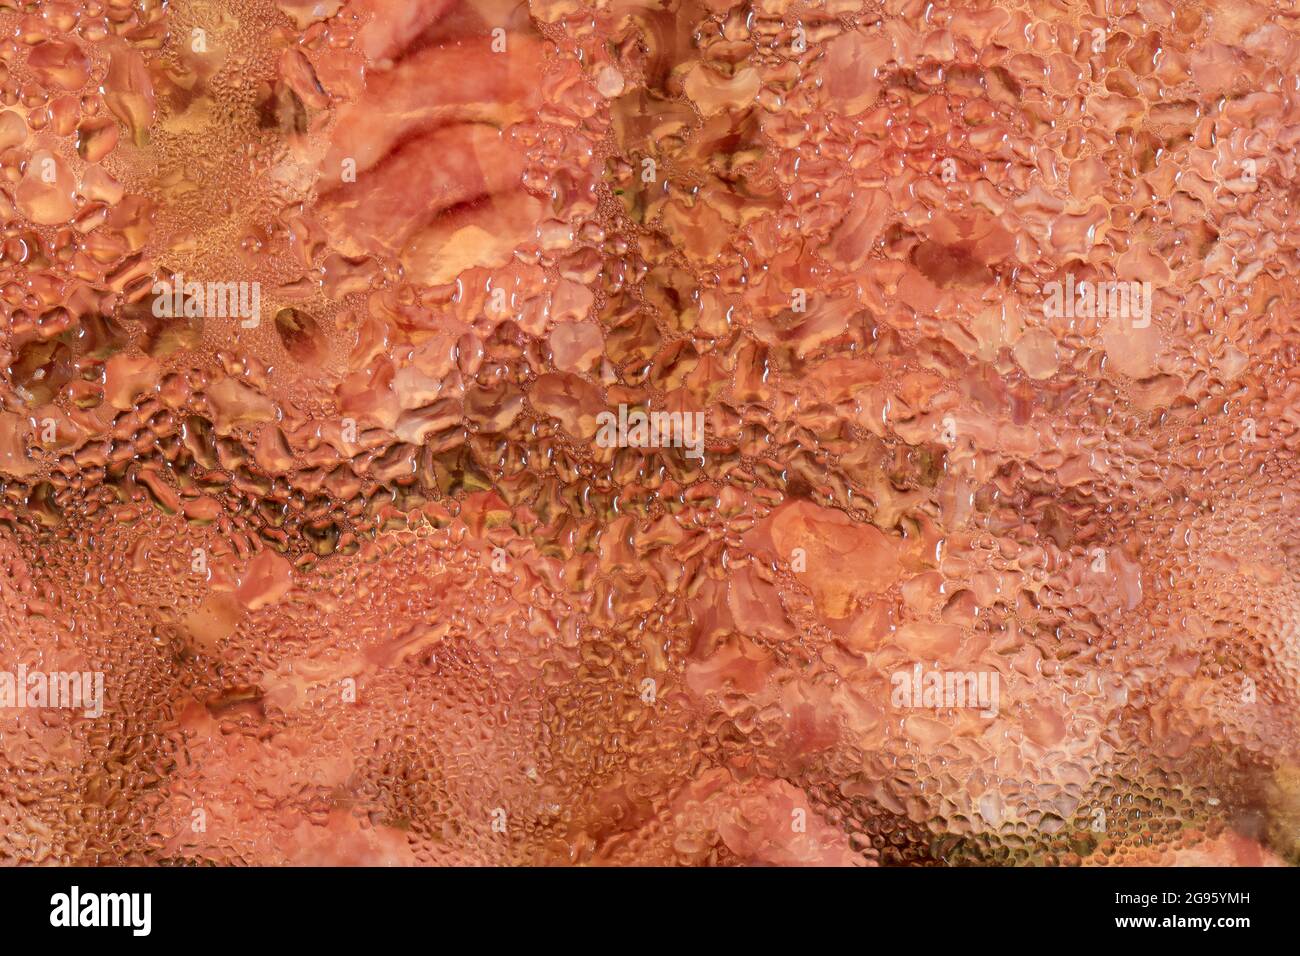 Abstract water condensation on a defrosting pack of supermarket mince meat.  Sort of reminds me of the menacing transparent eggs in the old Alien movie  Stock Photo - Alamy